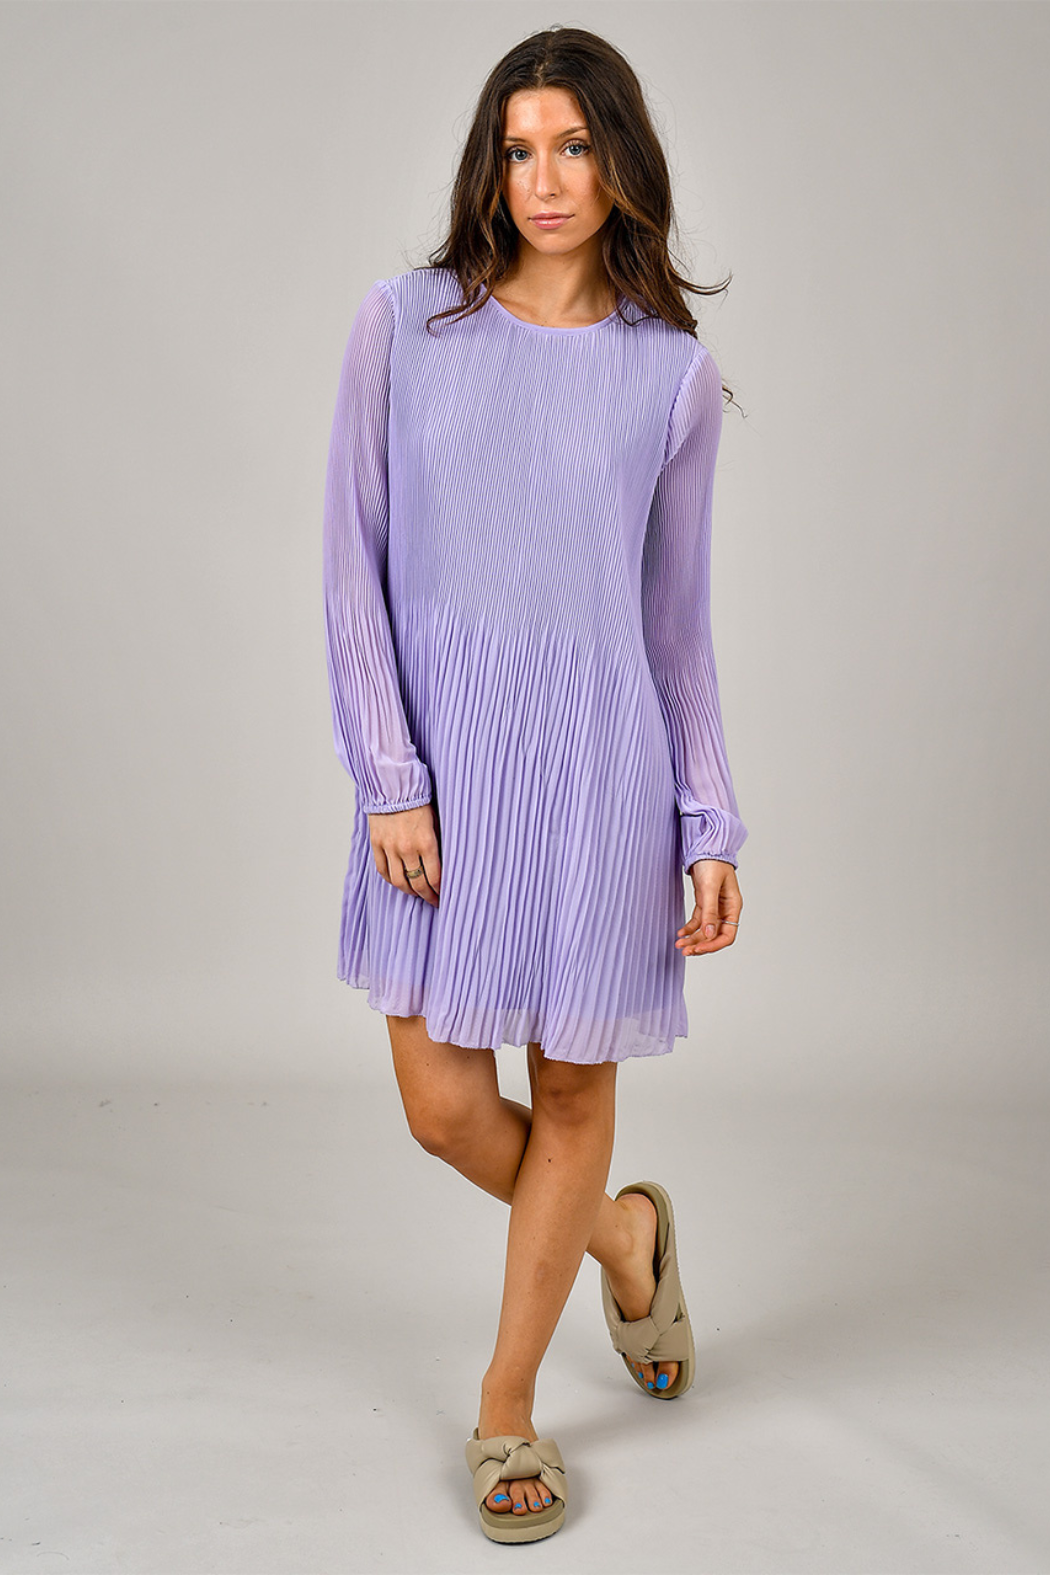 Priscilla Pleat Dress - Lavender | RD Style - Clearance